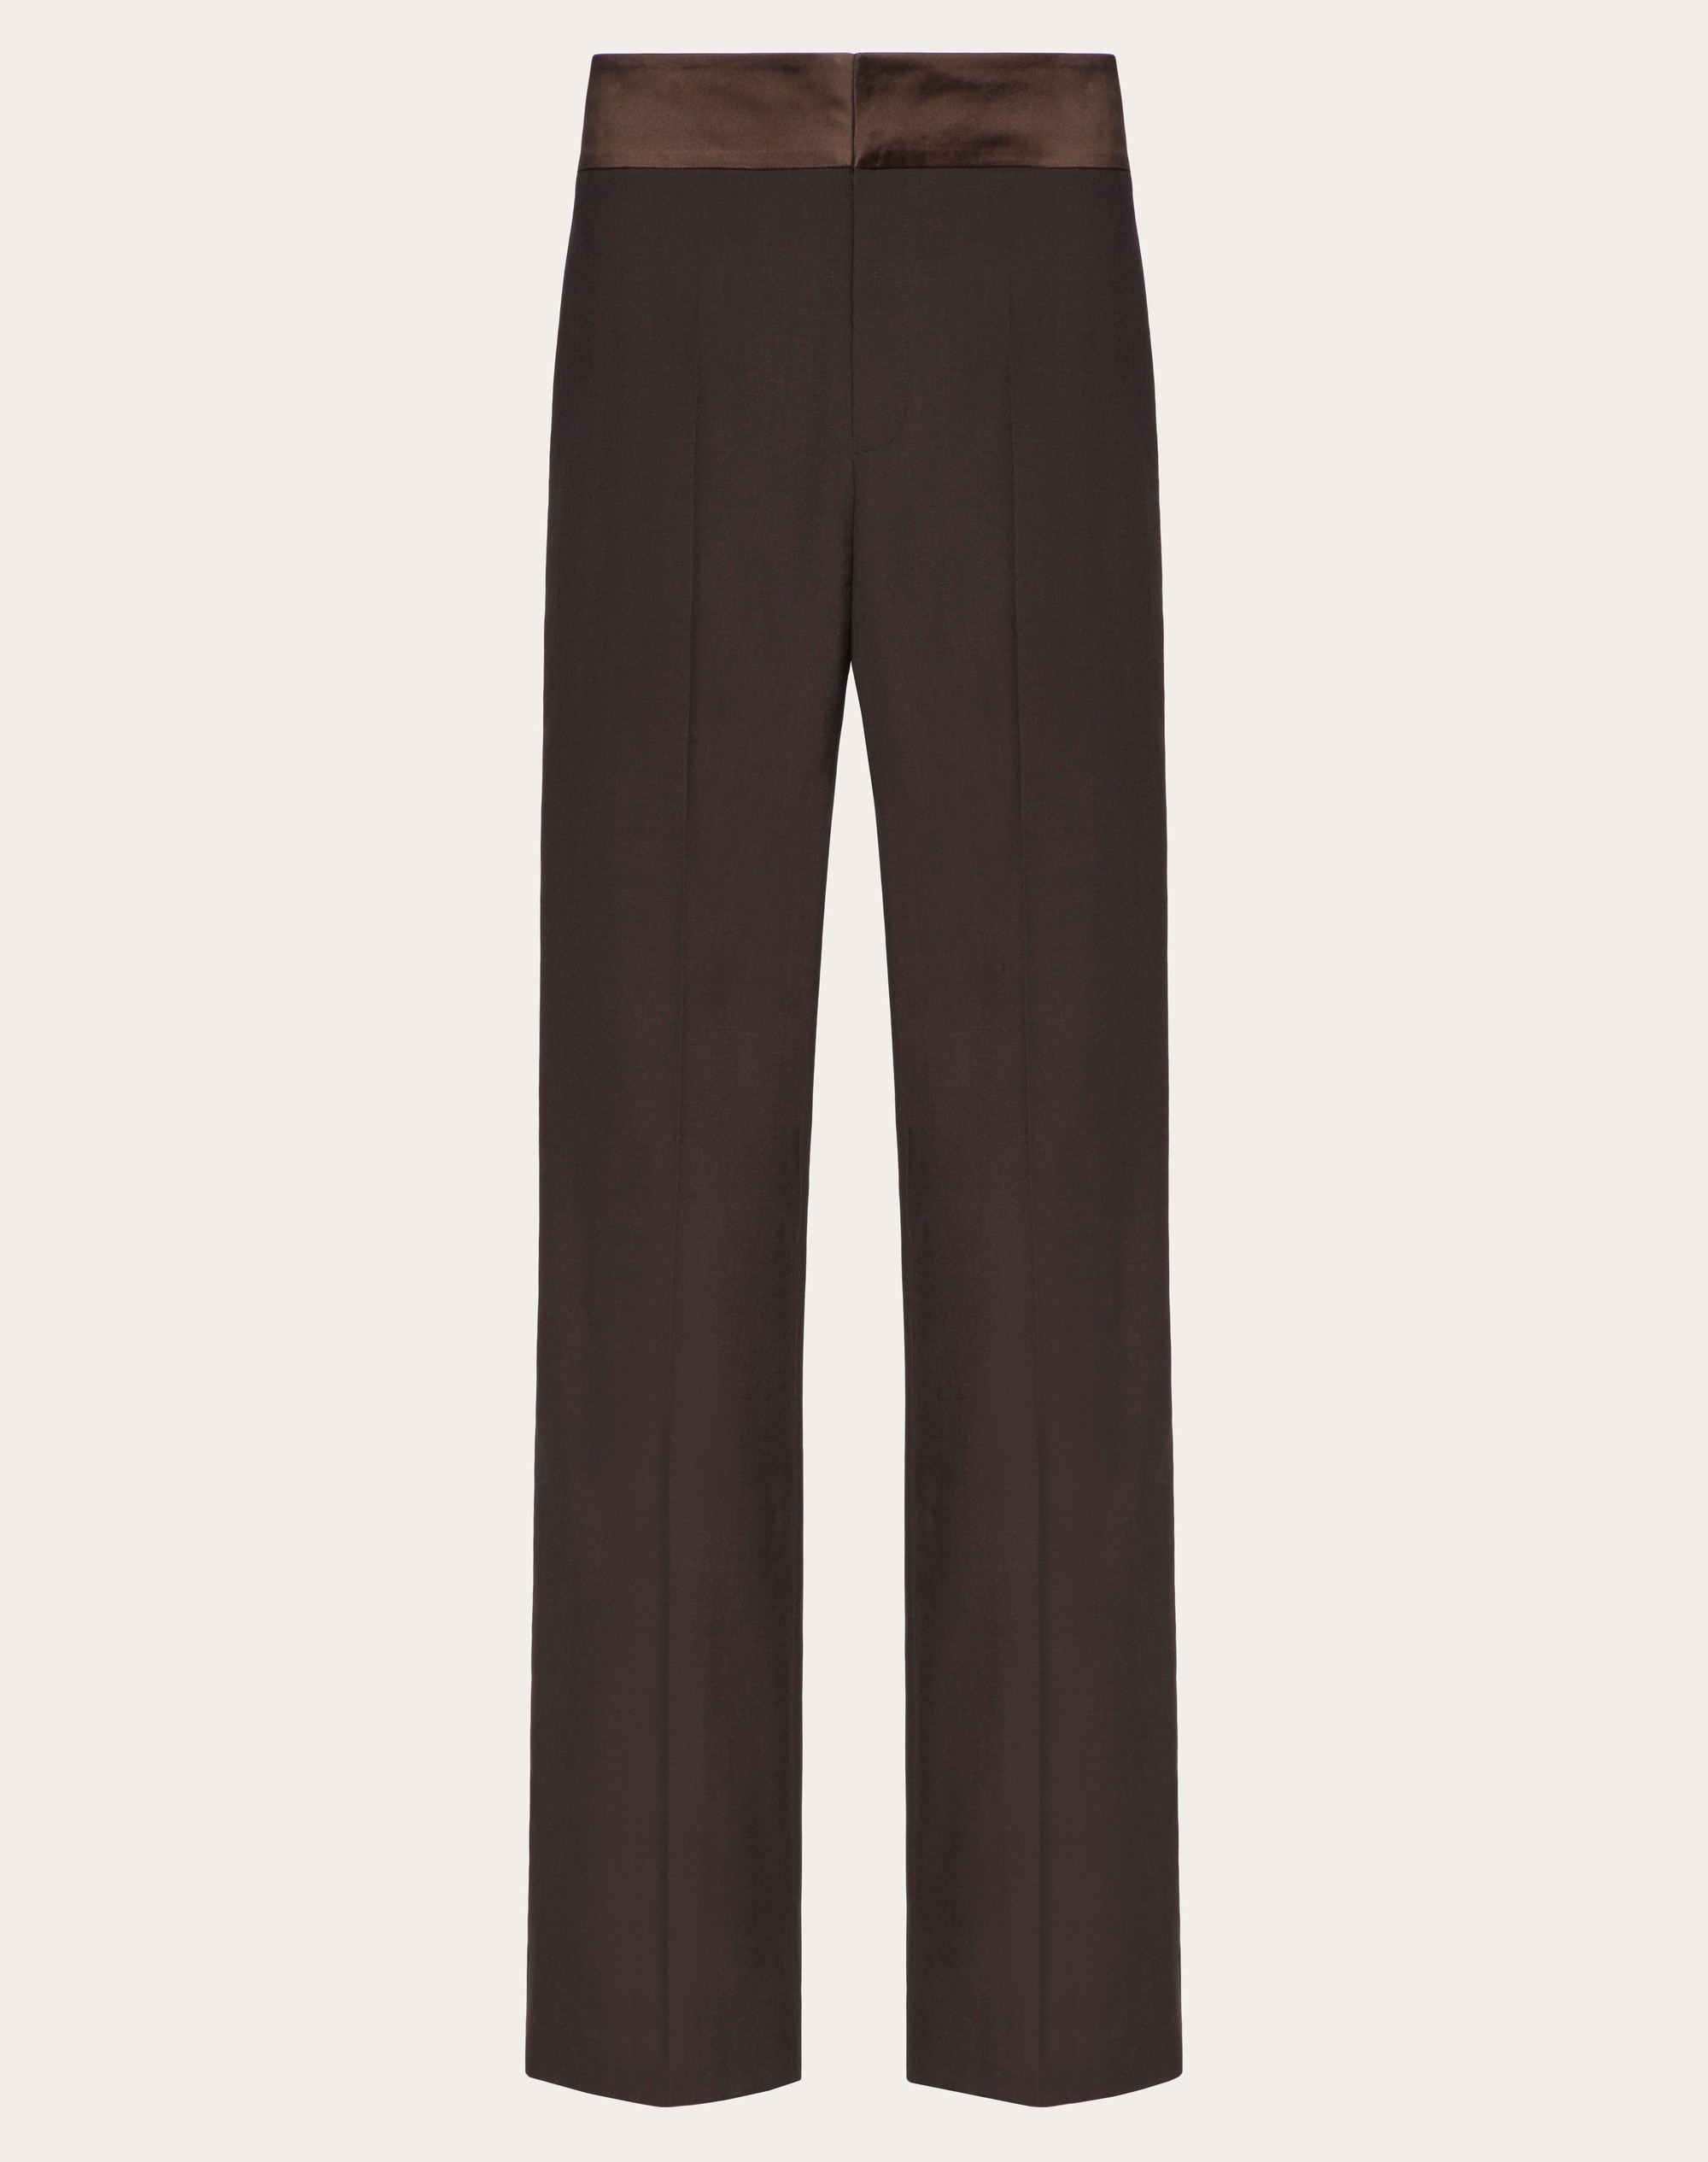 WOOL PANTS WITH BELT AND SATIN SIDE BANDS - 1